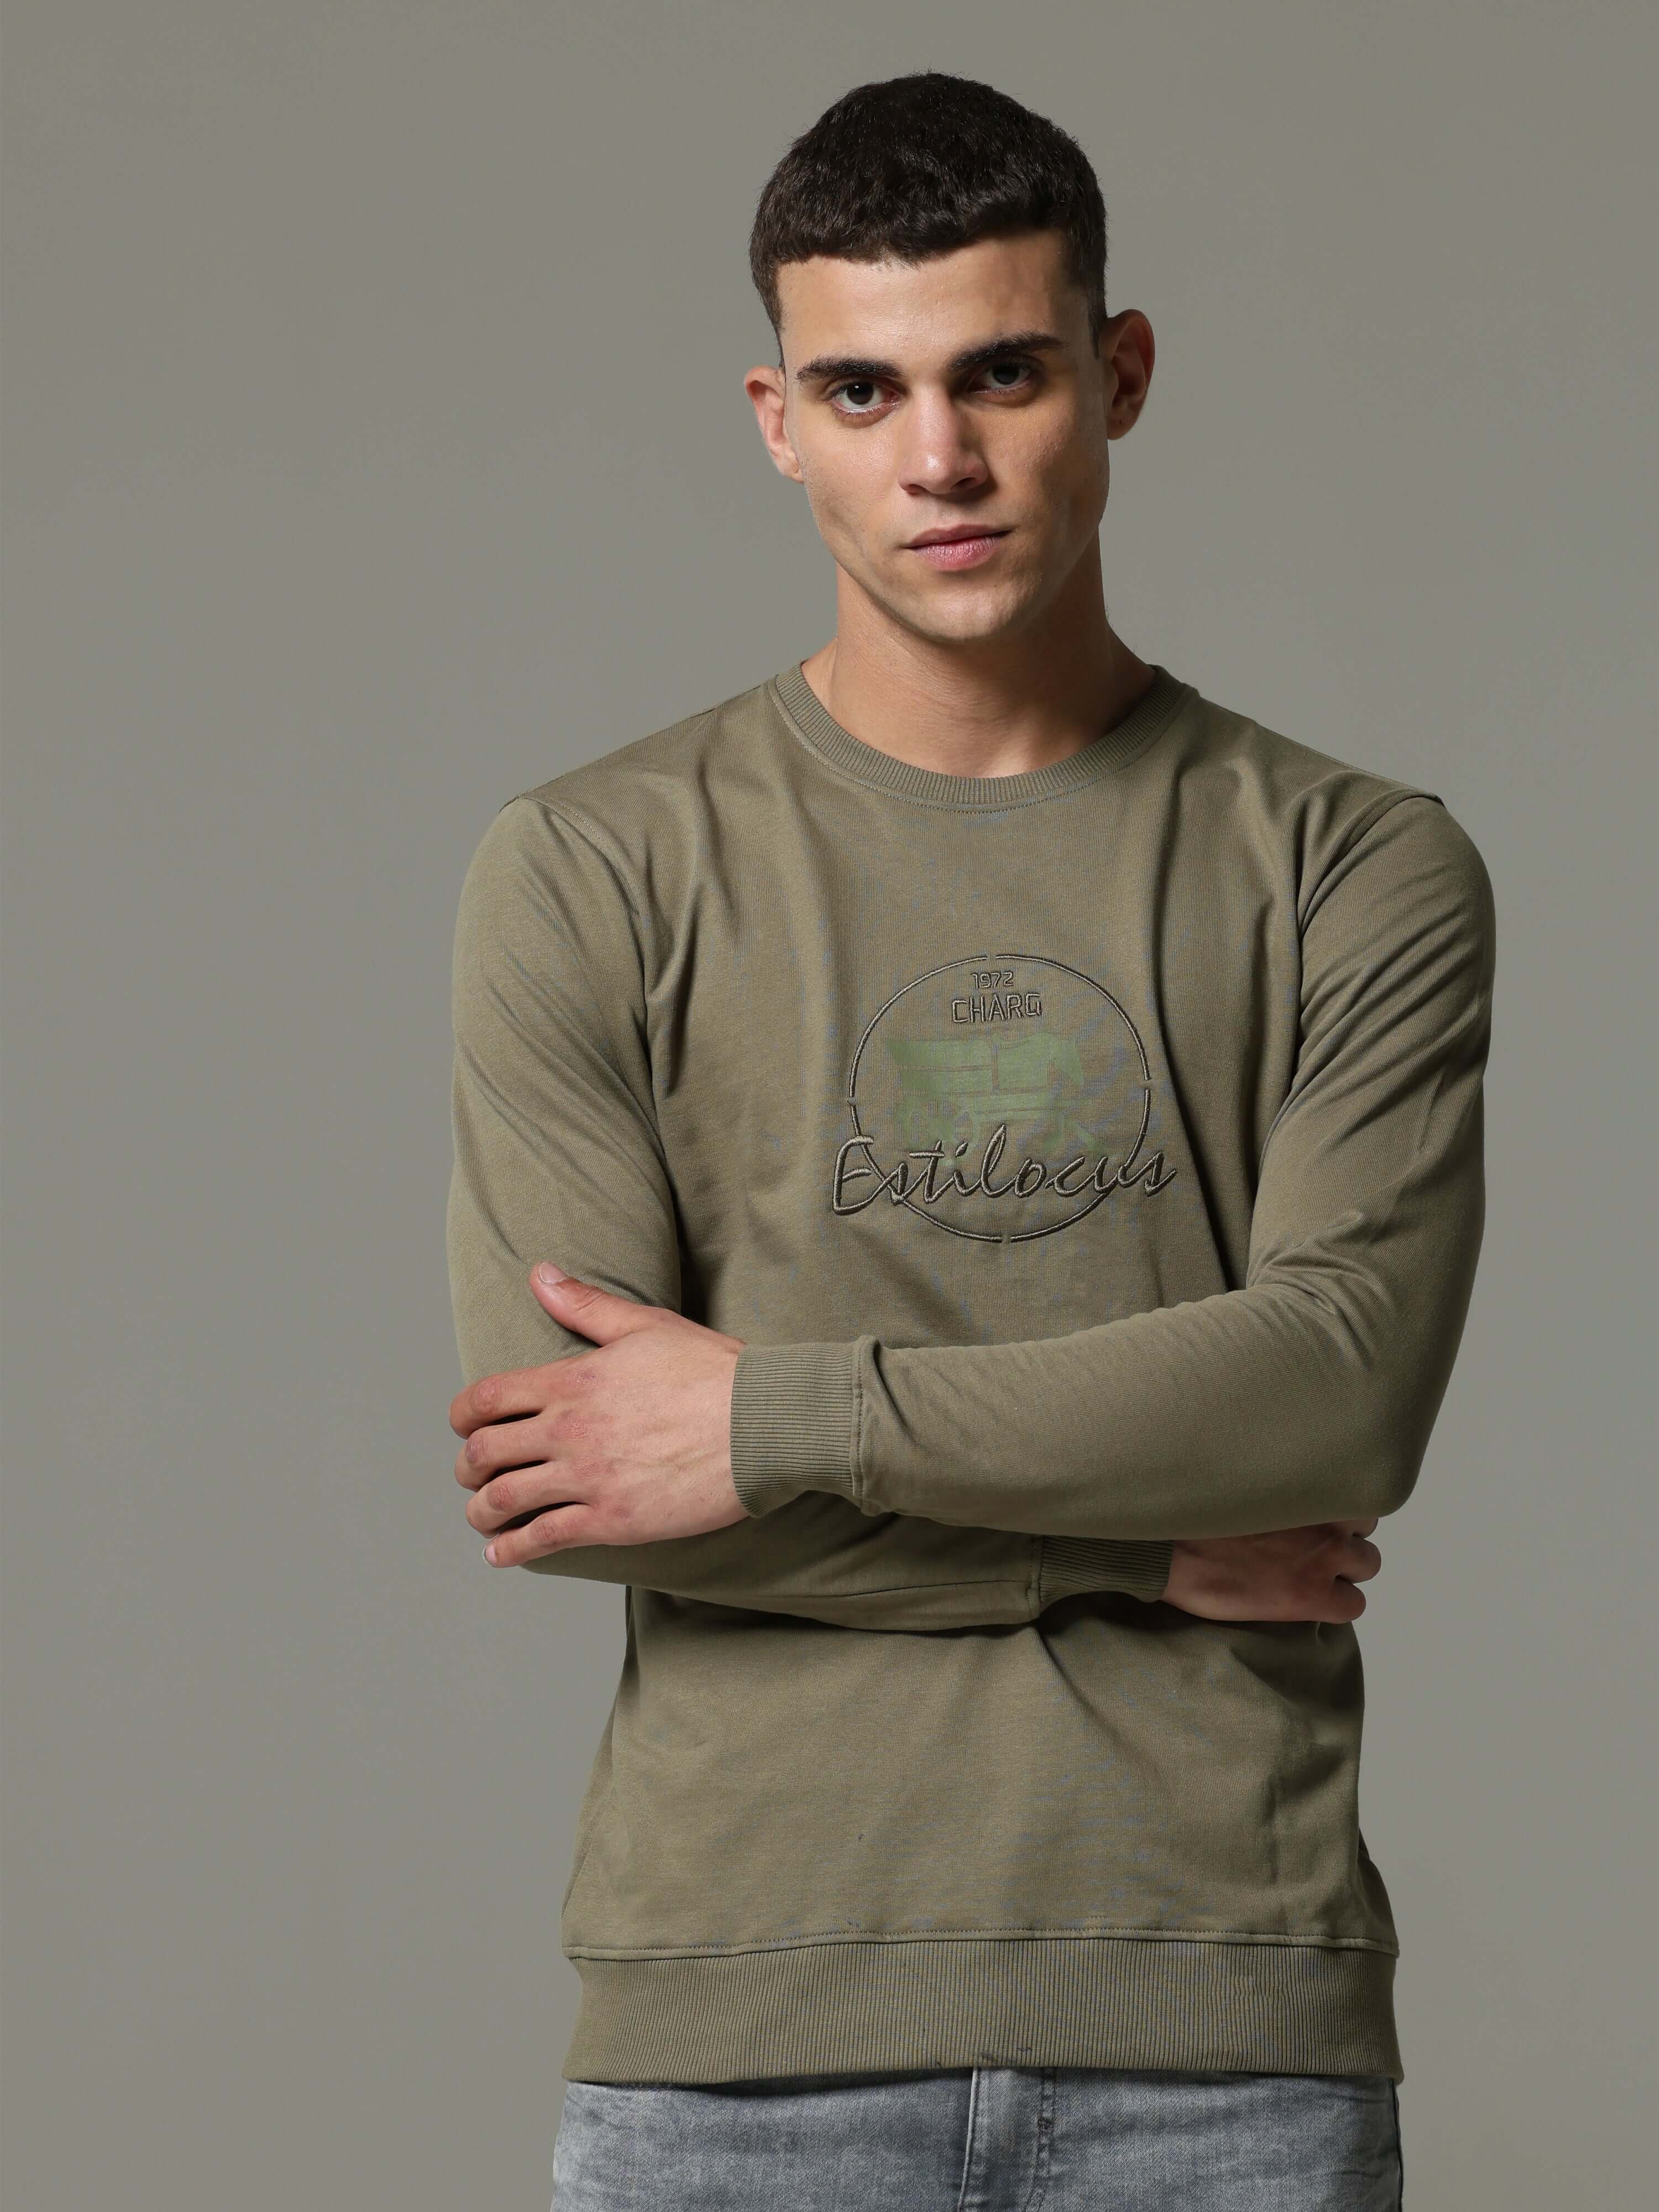 Invisible Green Sweat Shirt shop online at Estilocus. • Crew neck • Long sleeve • Ribbing around neckline, Cuff & hem • High quality print and fine embroidery Fit : Comfort fit Size : The model is wearing M size Model height : 6 Feet Wash care : Cold mach